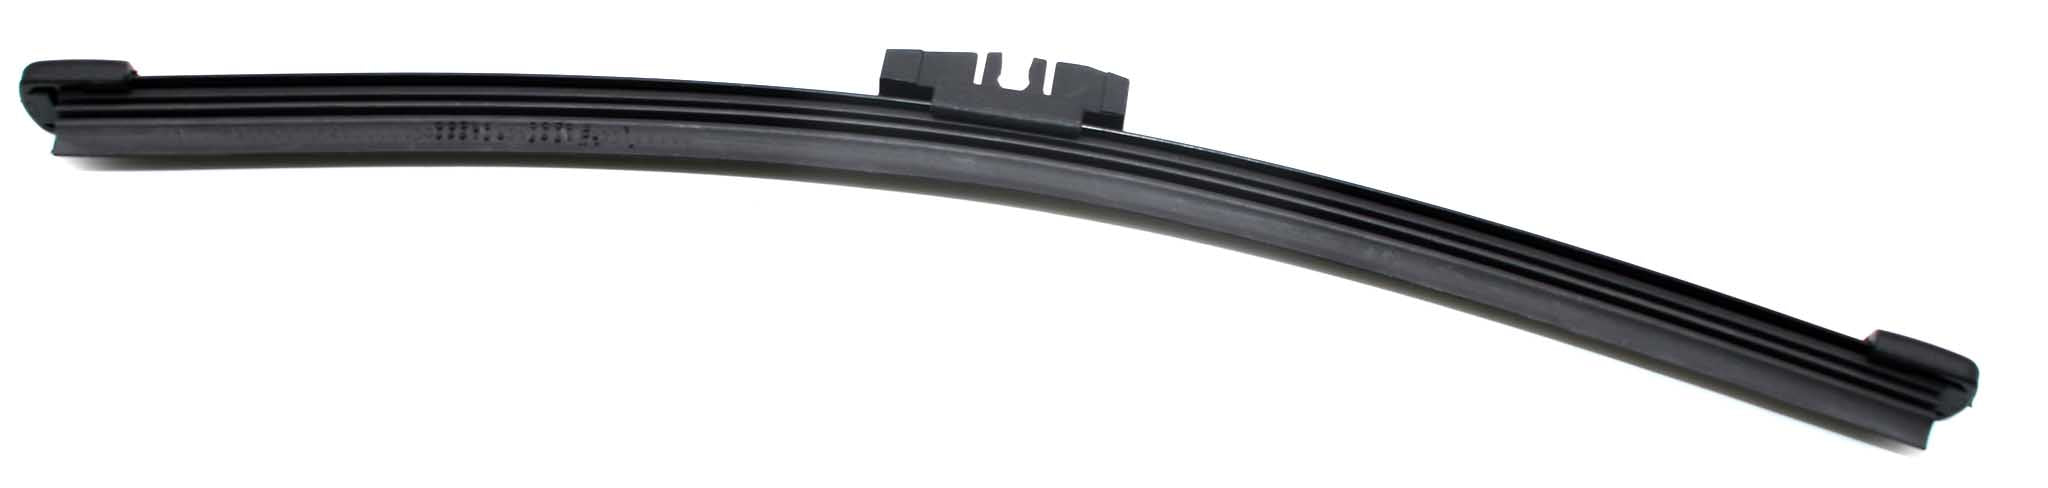 WIPER BLADE SUITABLE FOR MG RX5 REAR